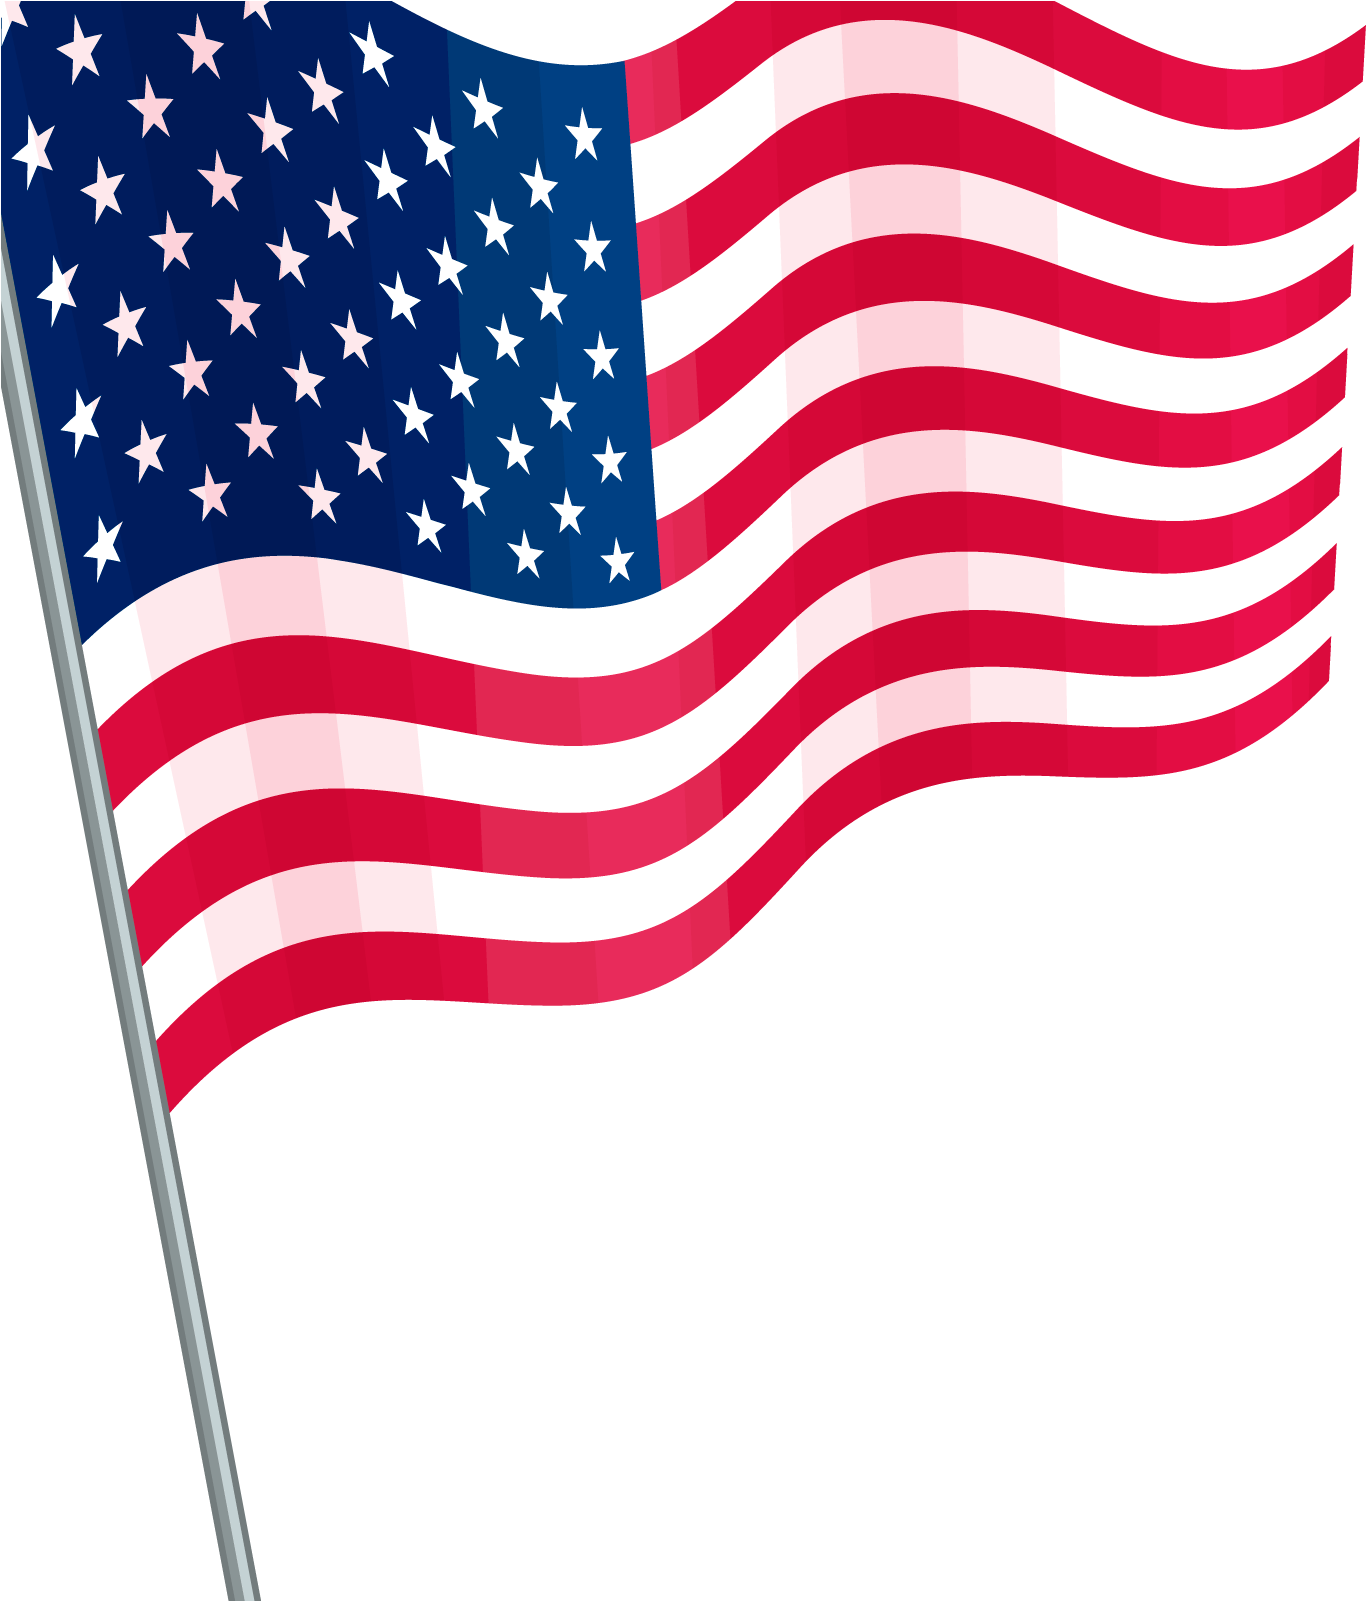 Flag Of The United States Clip Art - Flag Of The United States Clip Art (1600x1600)